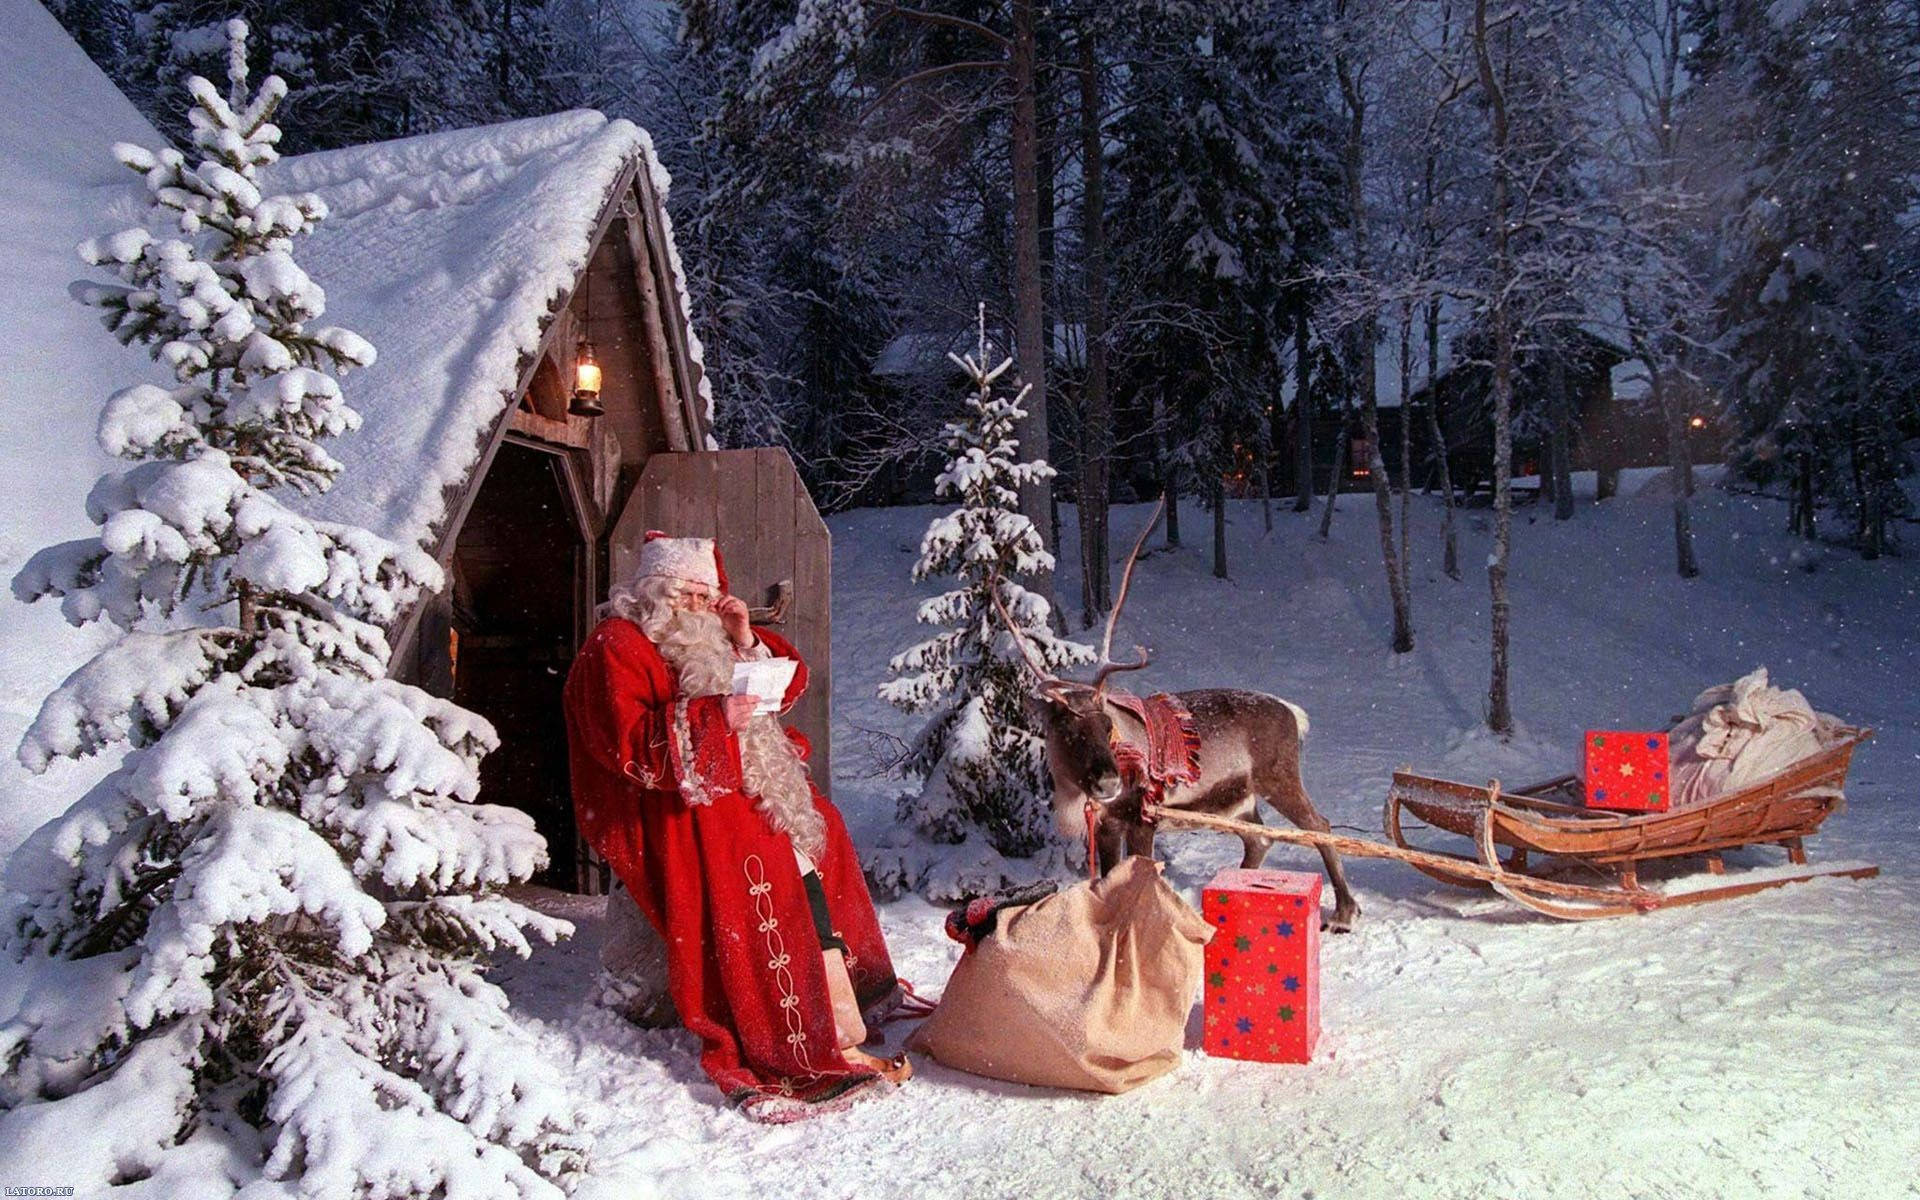 Cabin In Snow Christmas Holiday Desktop Background